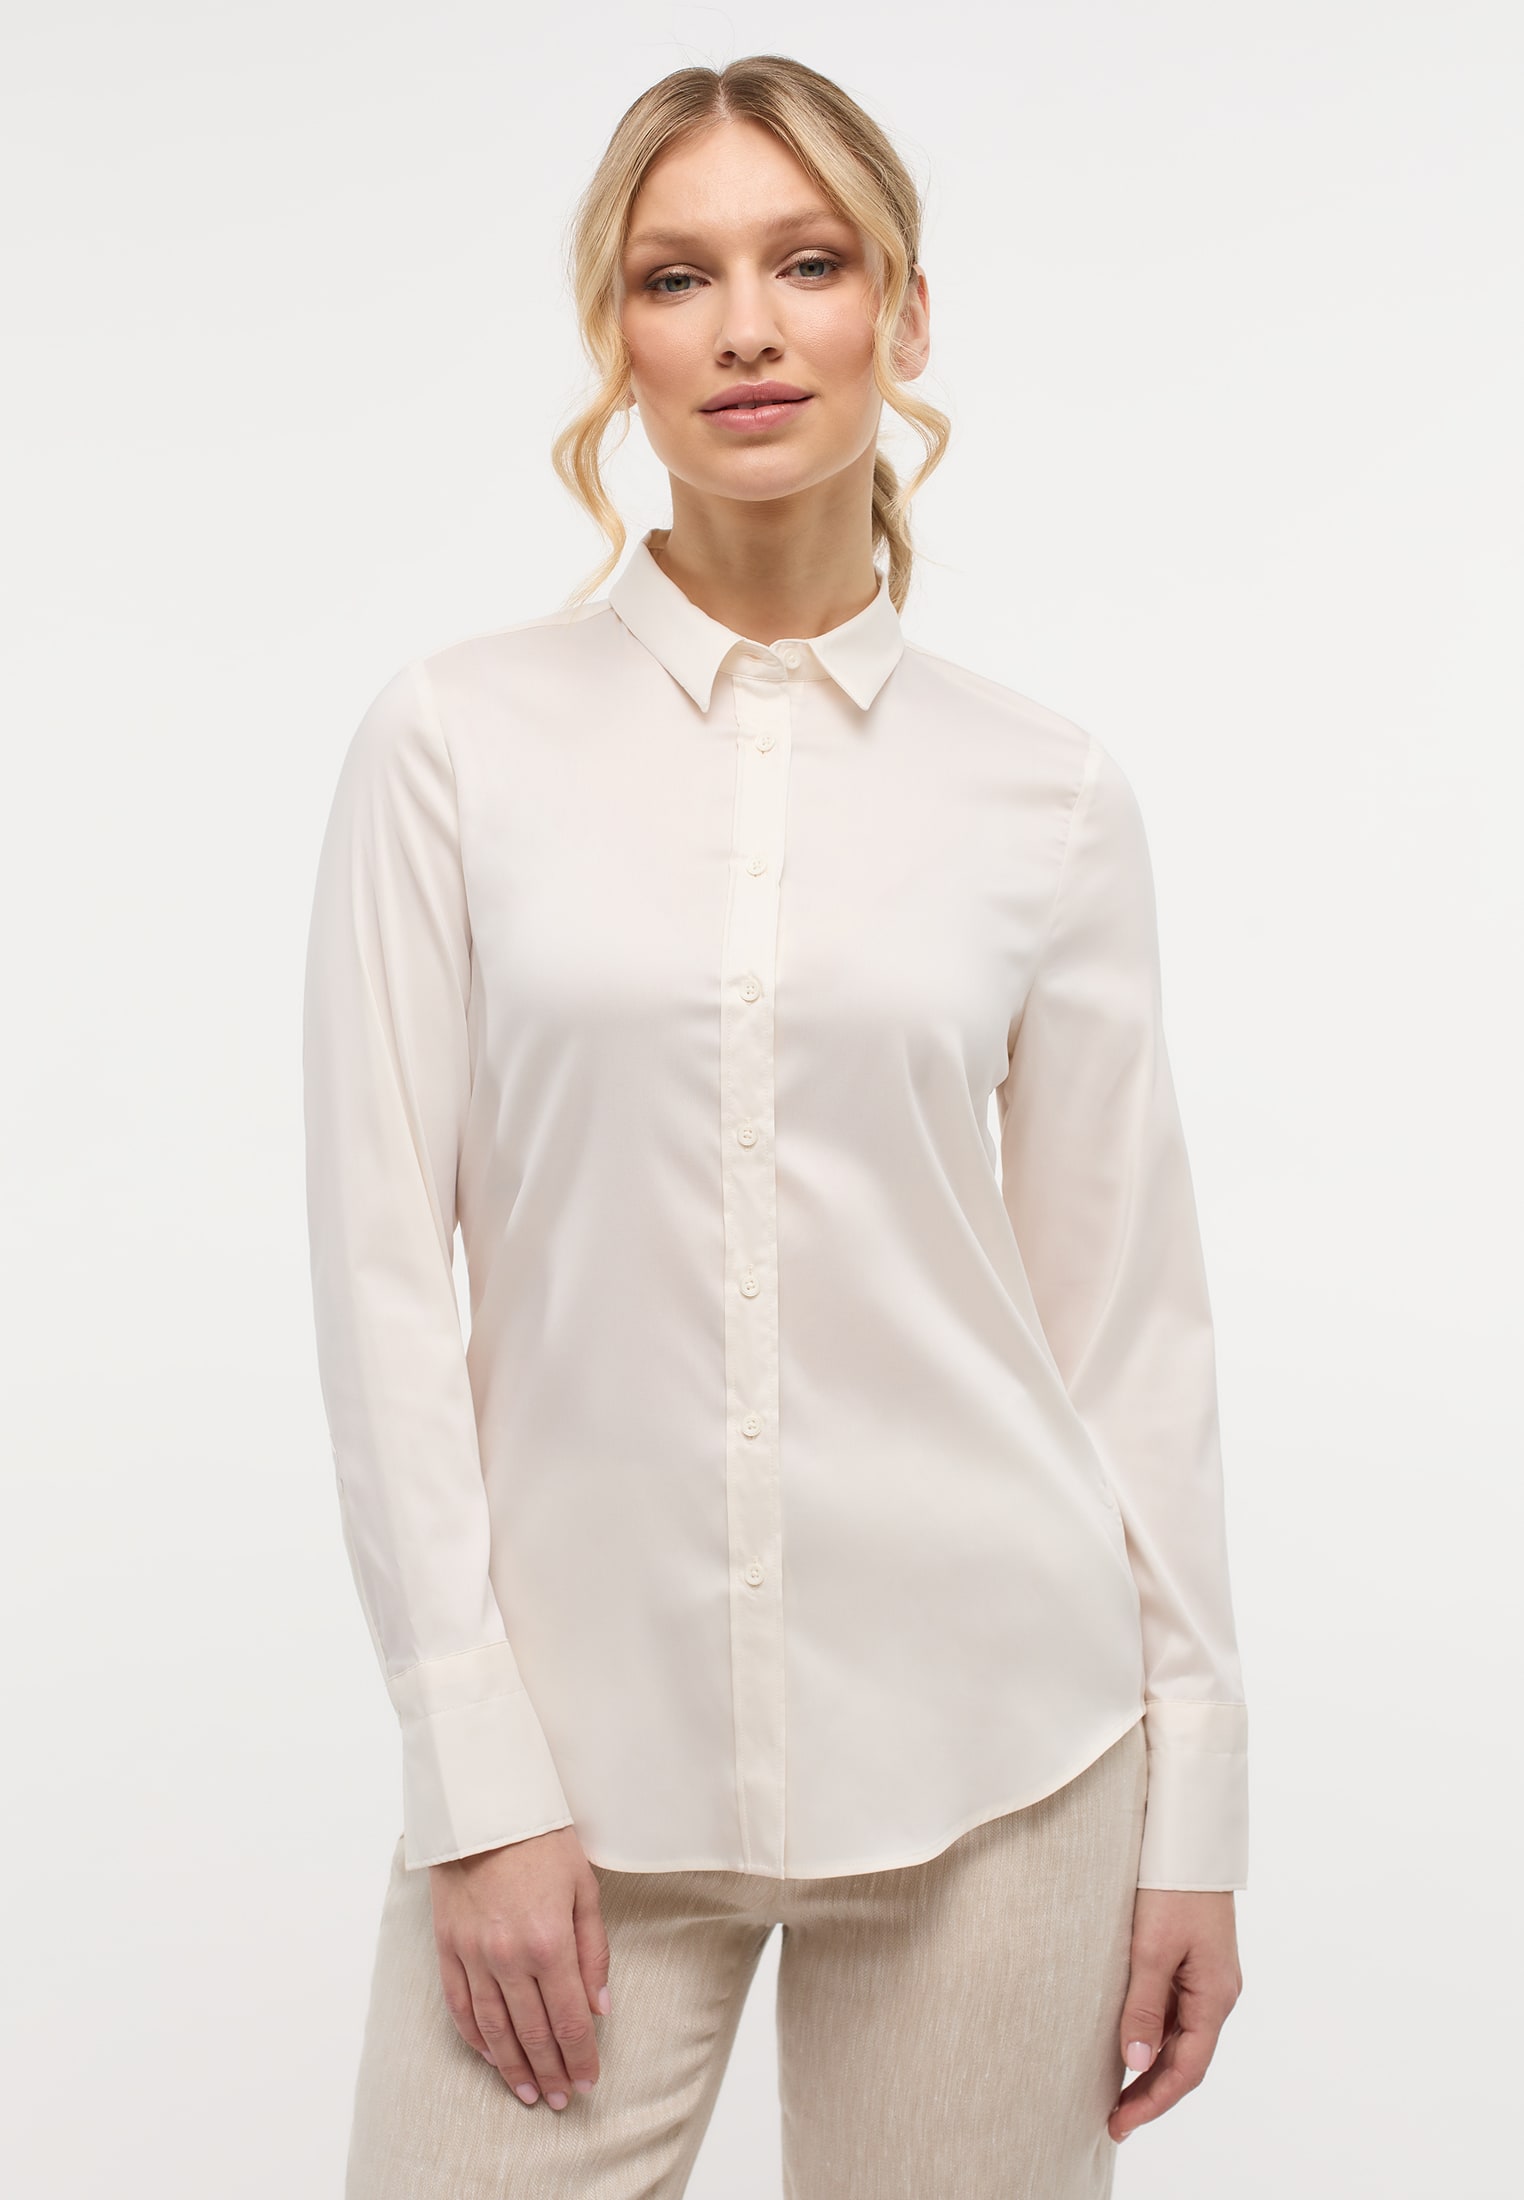 2BL00441-00-02-38-1/1 Bluse | in off-white Performance Langarm | Shirt unifarben | off-white | 38